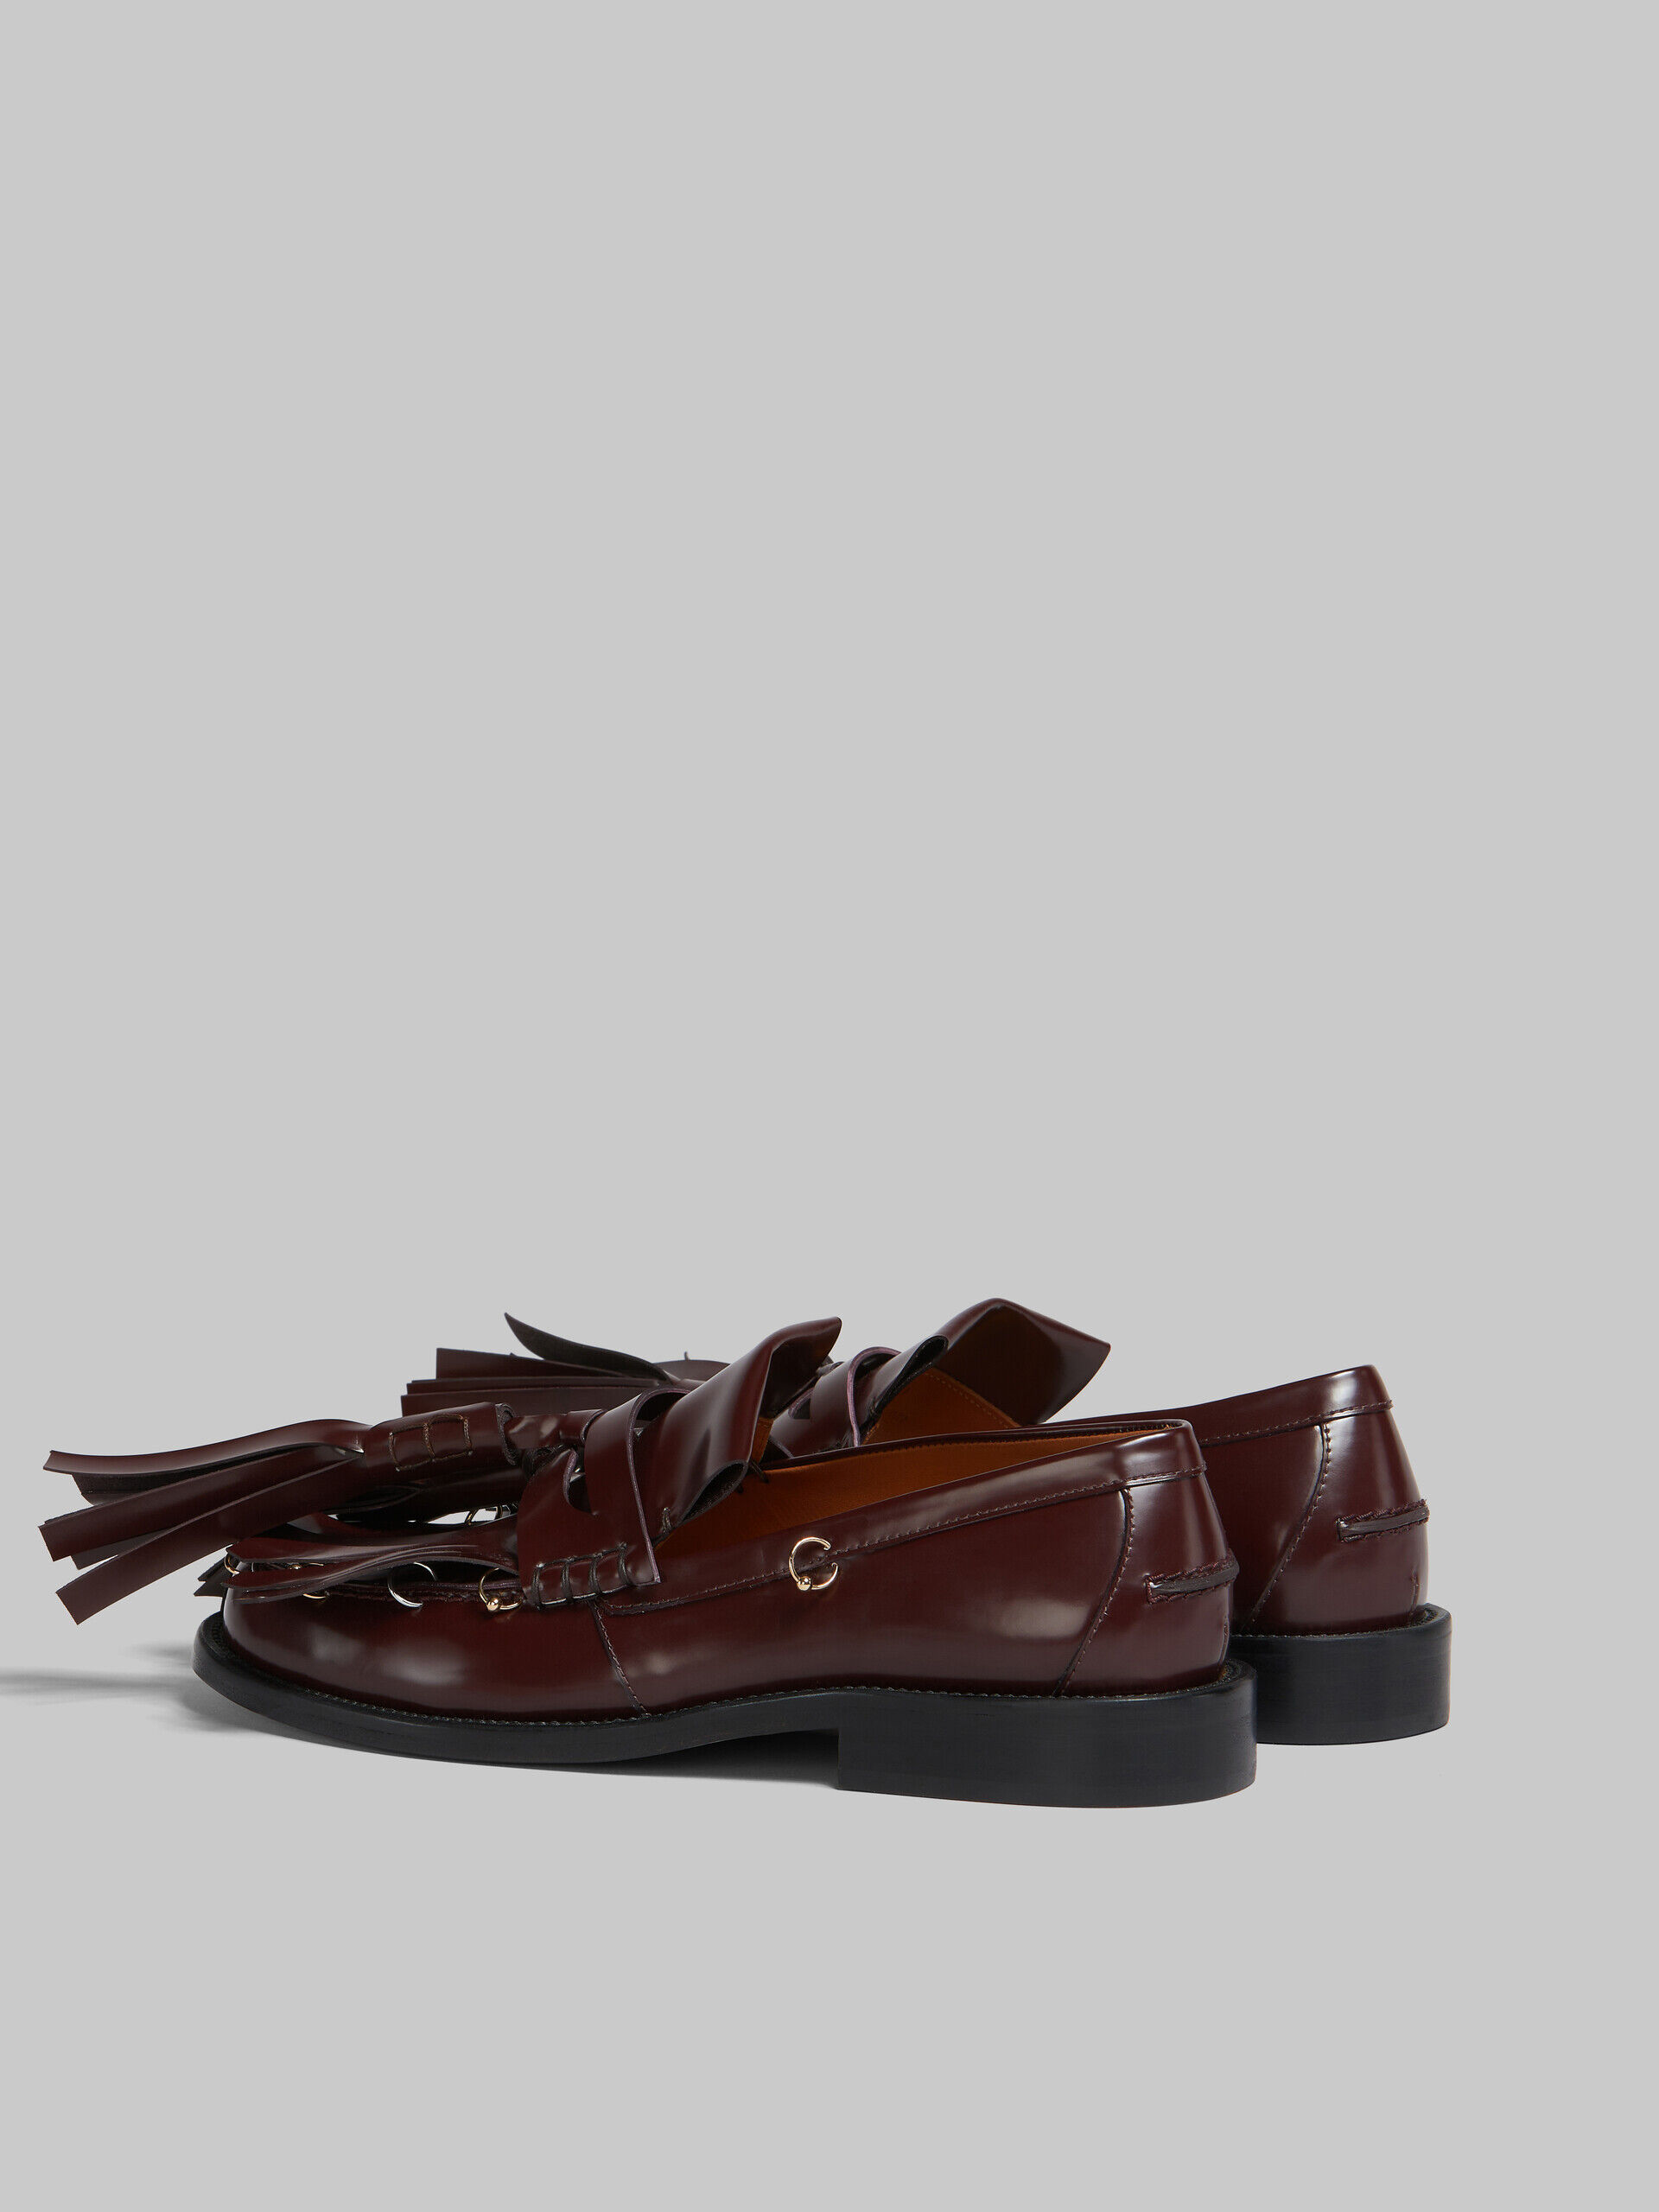 Burgundy leather Bambi loafer with maxi tassels | Marni